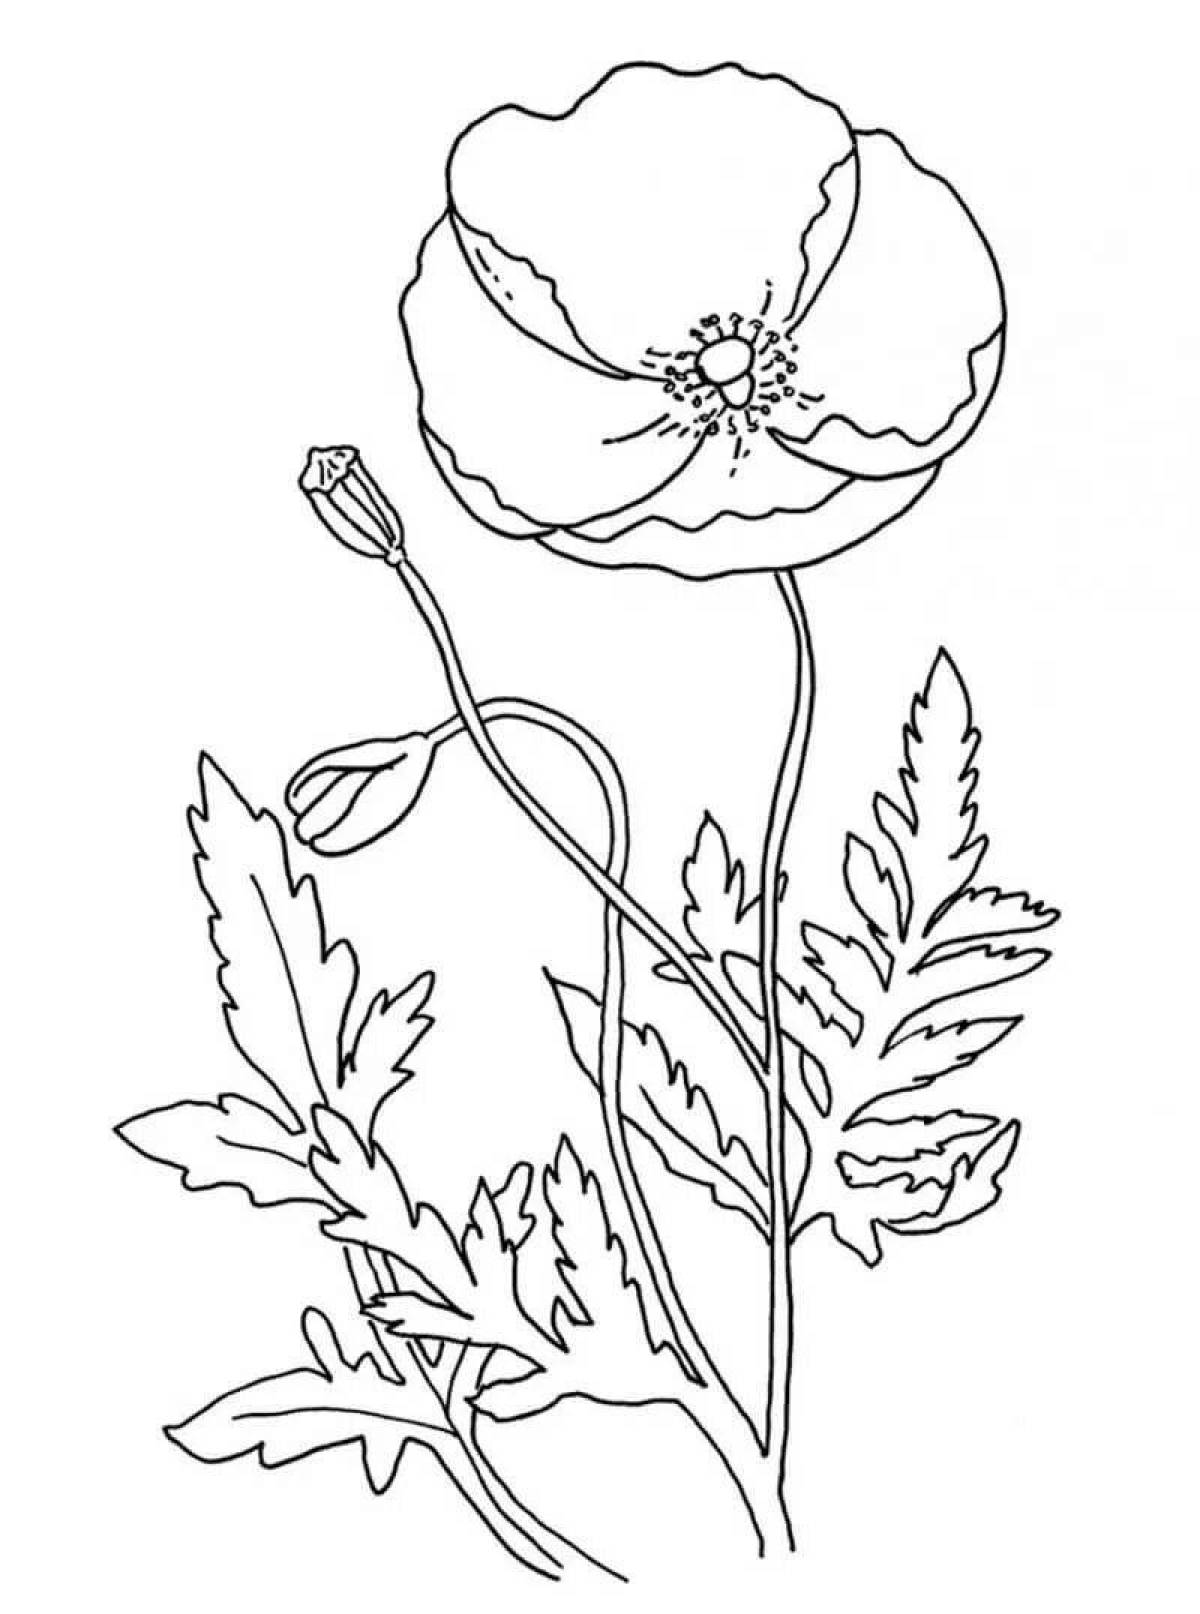 Living wild flowers coloring for children